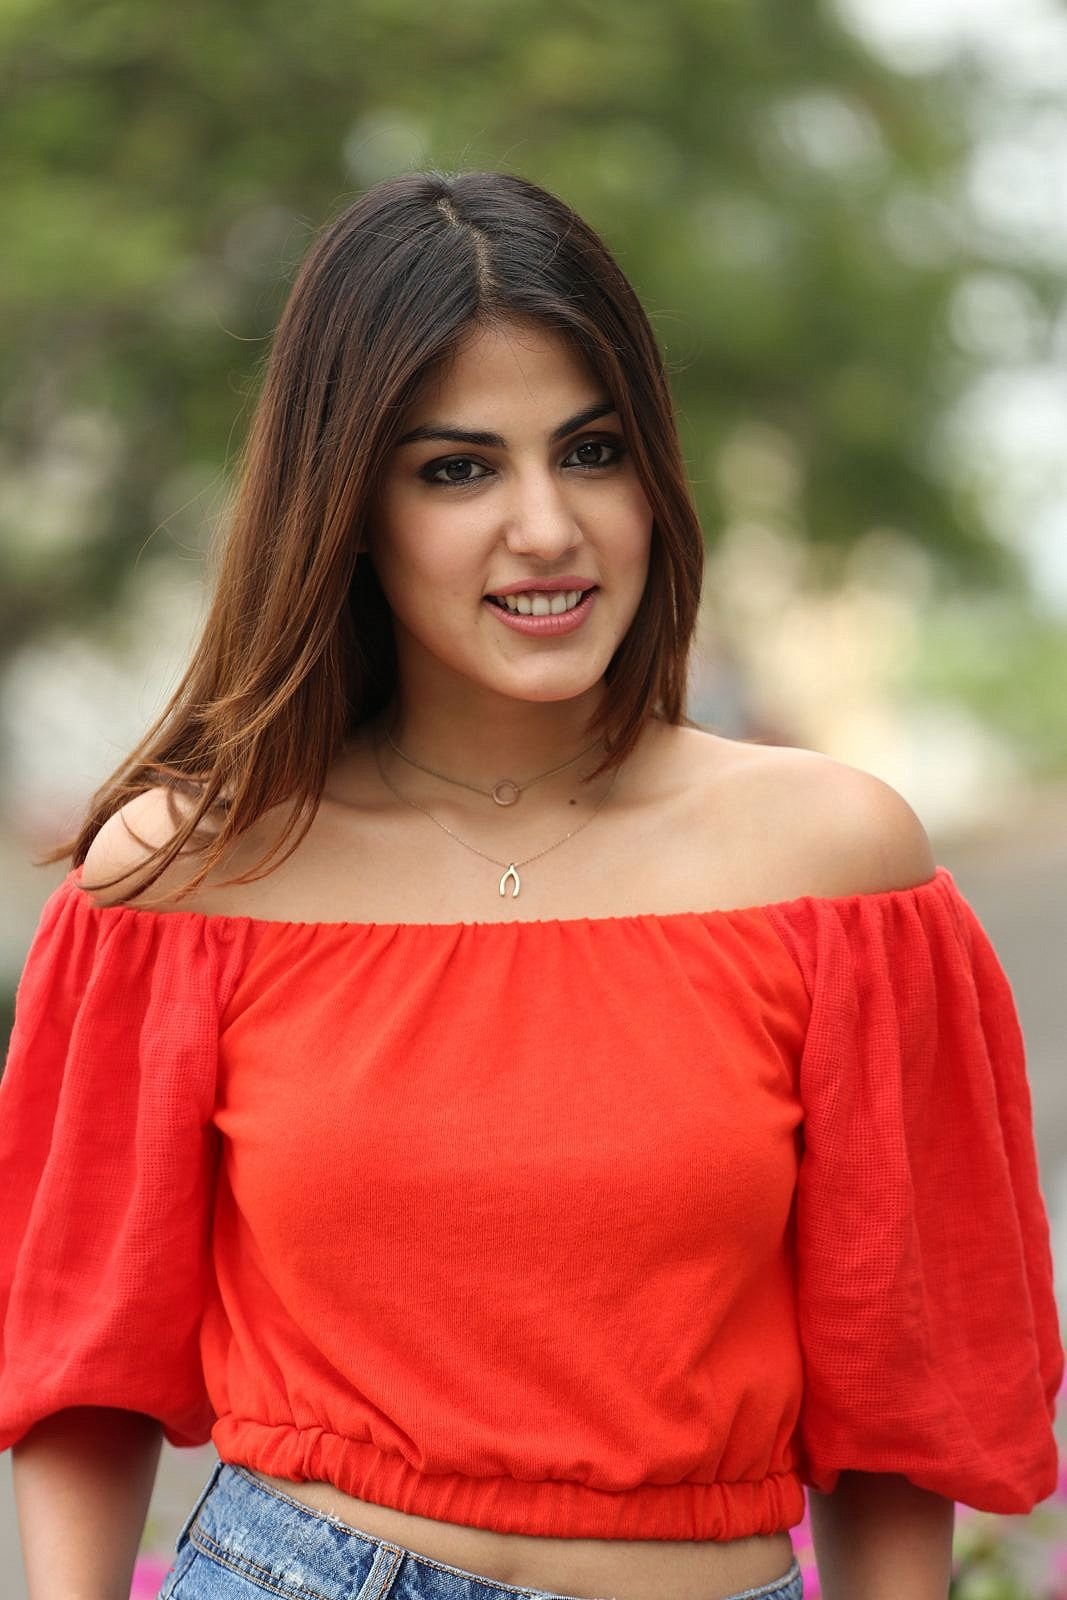 Rhea Chakraborty Displays Her Sexy Legs and Toned Midriff in Her Latest Hot Photo shoot